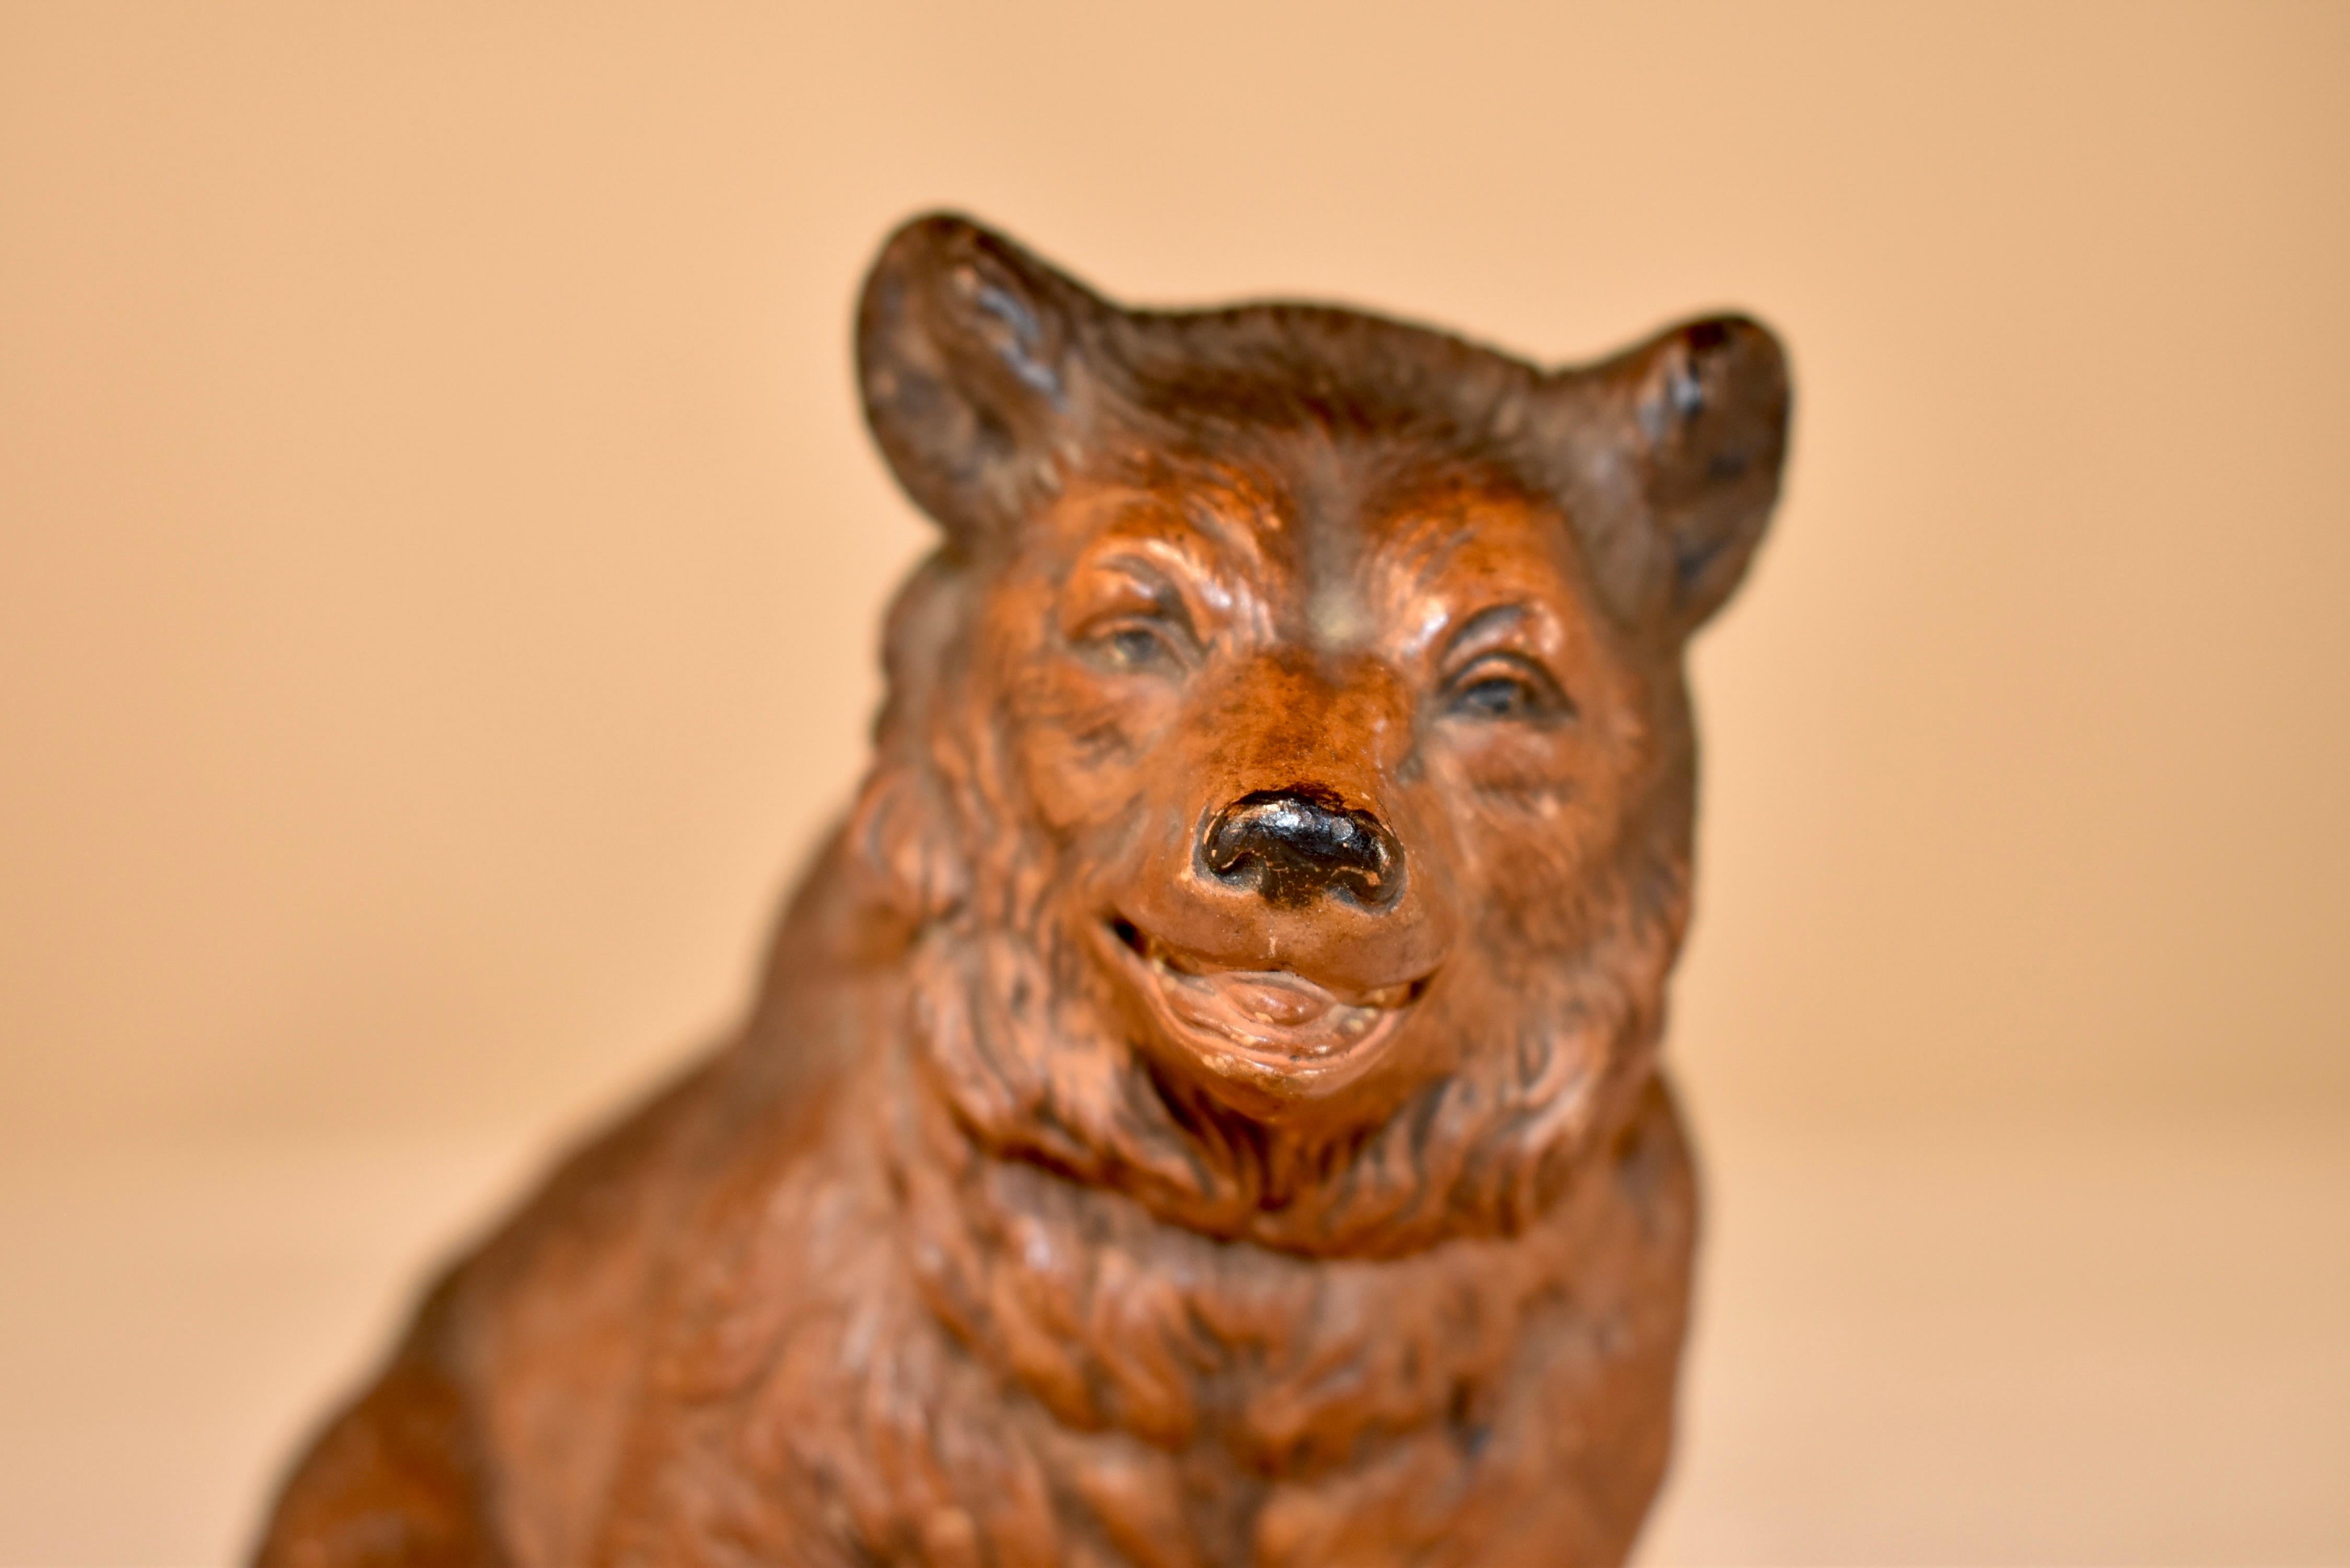 19th century terracotta bear figure from Austria. He is a wonderful mold and is hand painted with such expression! He has lovely detail and is certain to put a smile on your face.